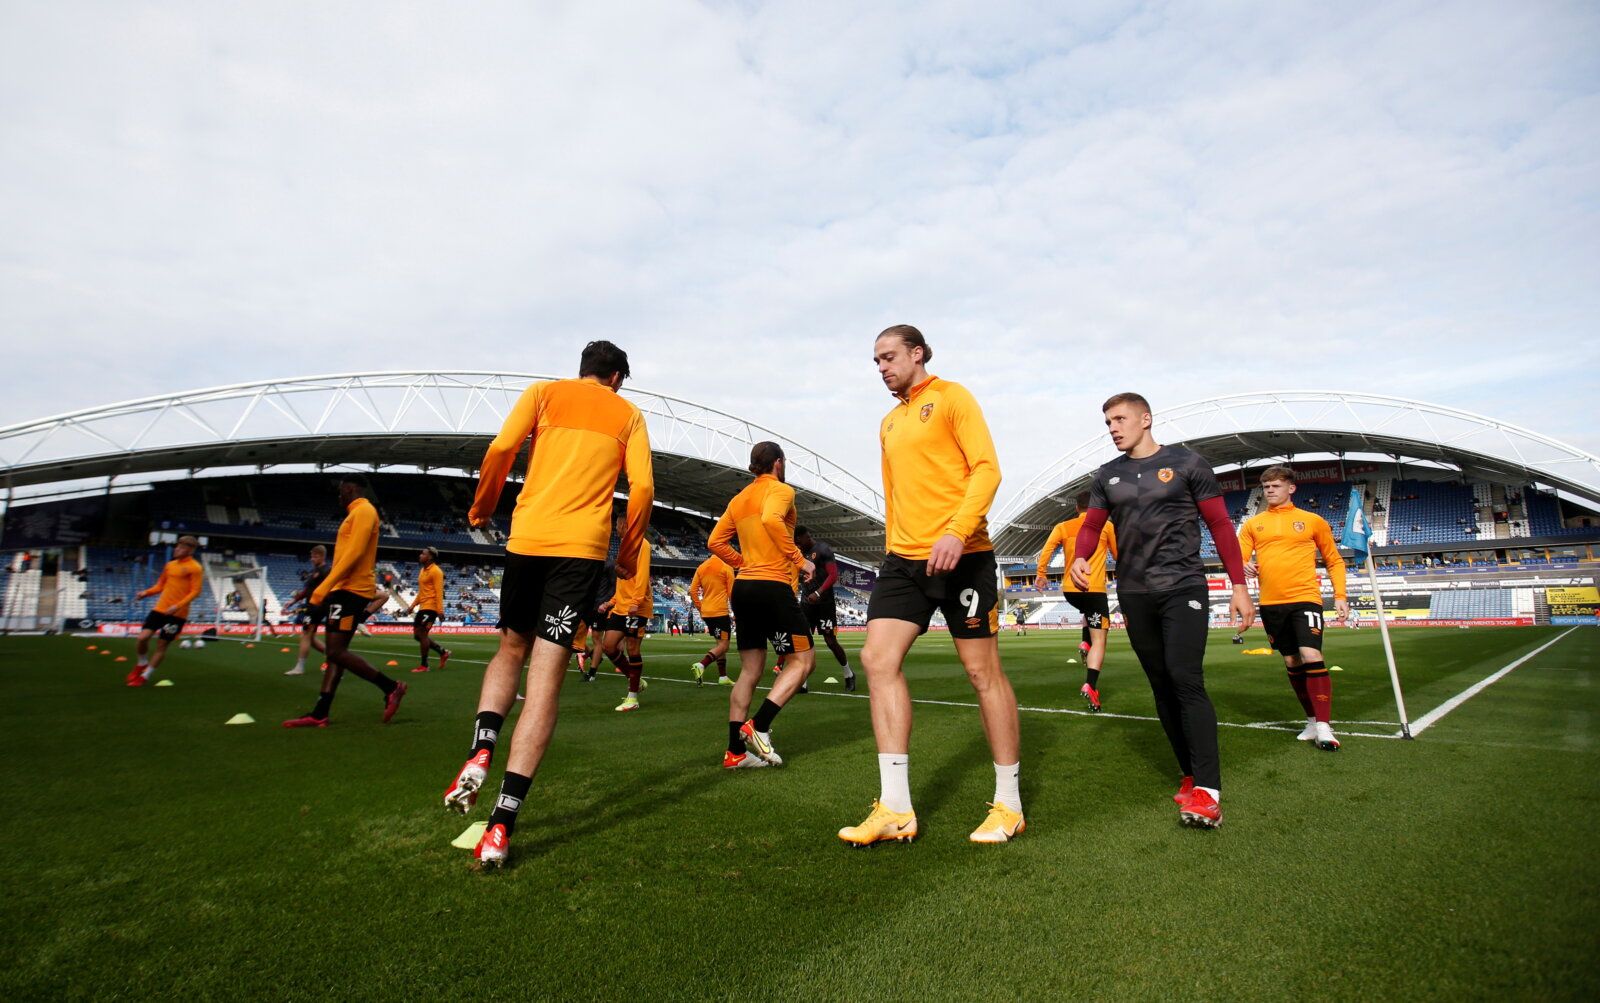 Soccer Football - Championship - Huddersfield Town v Hull City - John Smith's Stadium, Huddersfield, Britain - October 16, 2021 Hull City players during the warm up before the match   Action Images/Ed Sykes  EDITORIAL USE ONLY. No use with unauthorized audio, video, data, fixture lists, club/league logos or 